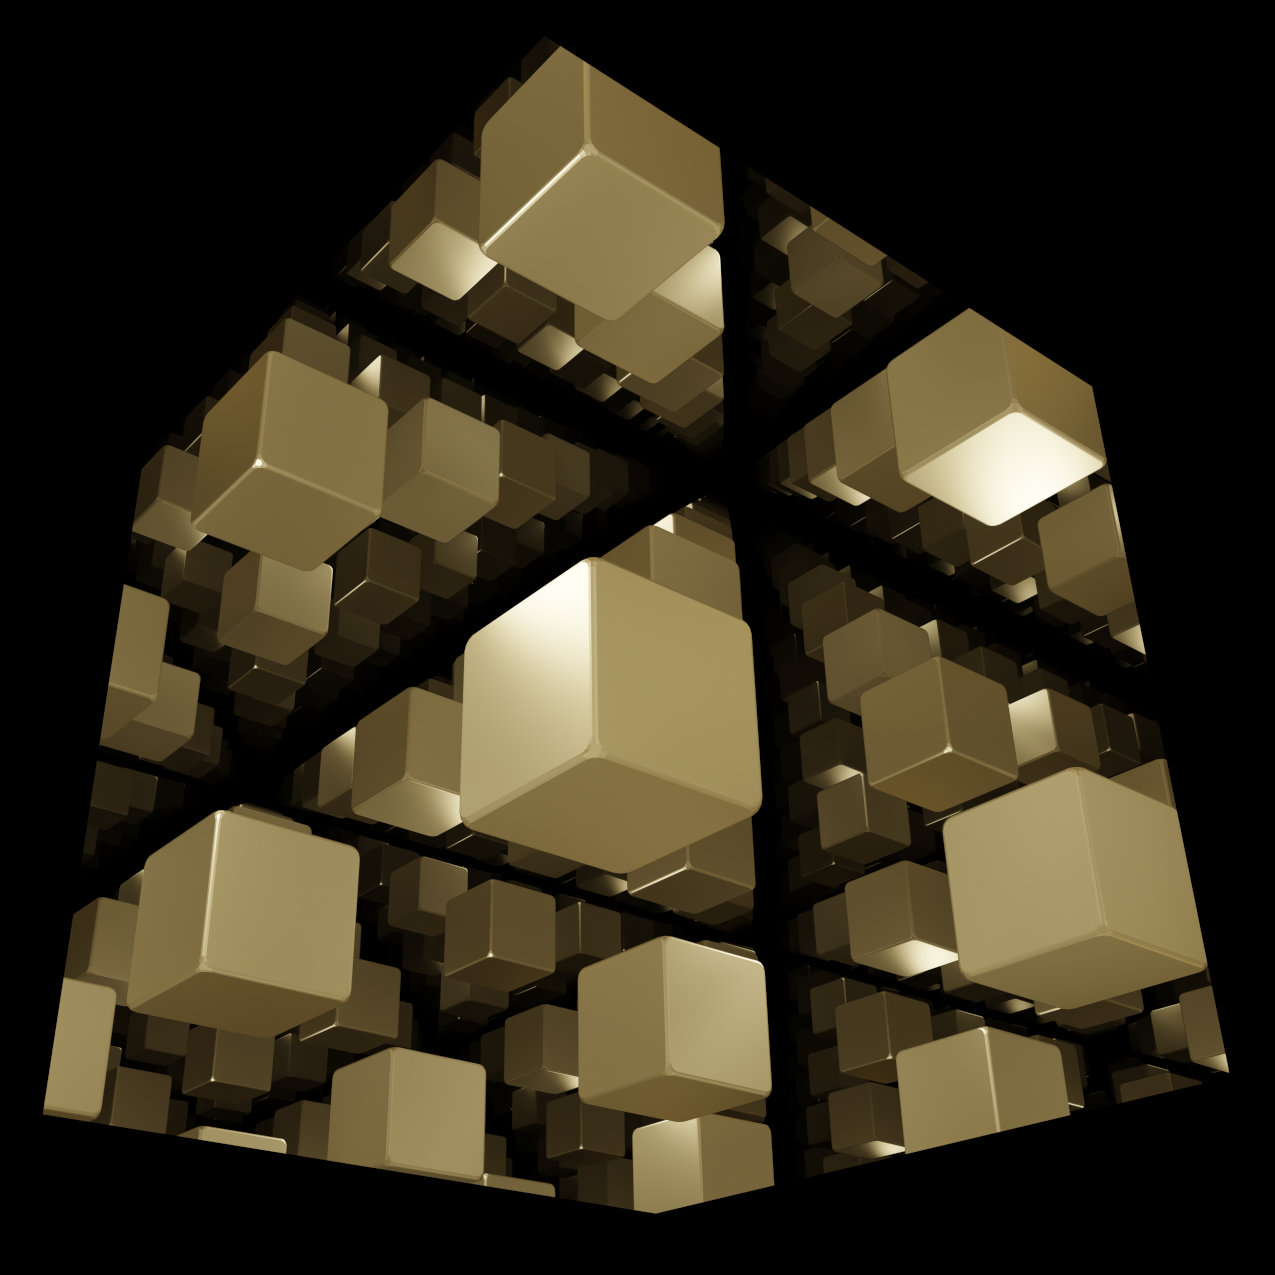 Virtual abstract scenery, Abstract digital art, Raytracing, Computer-rendered image, 2022. A golden cube appears in many reflected images in three spatial directions.